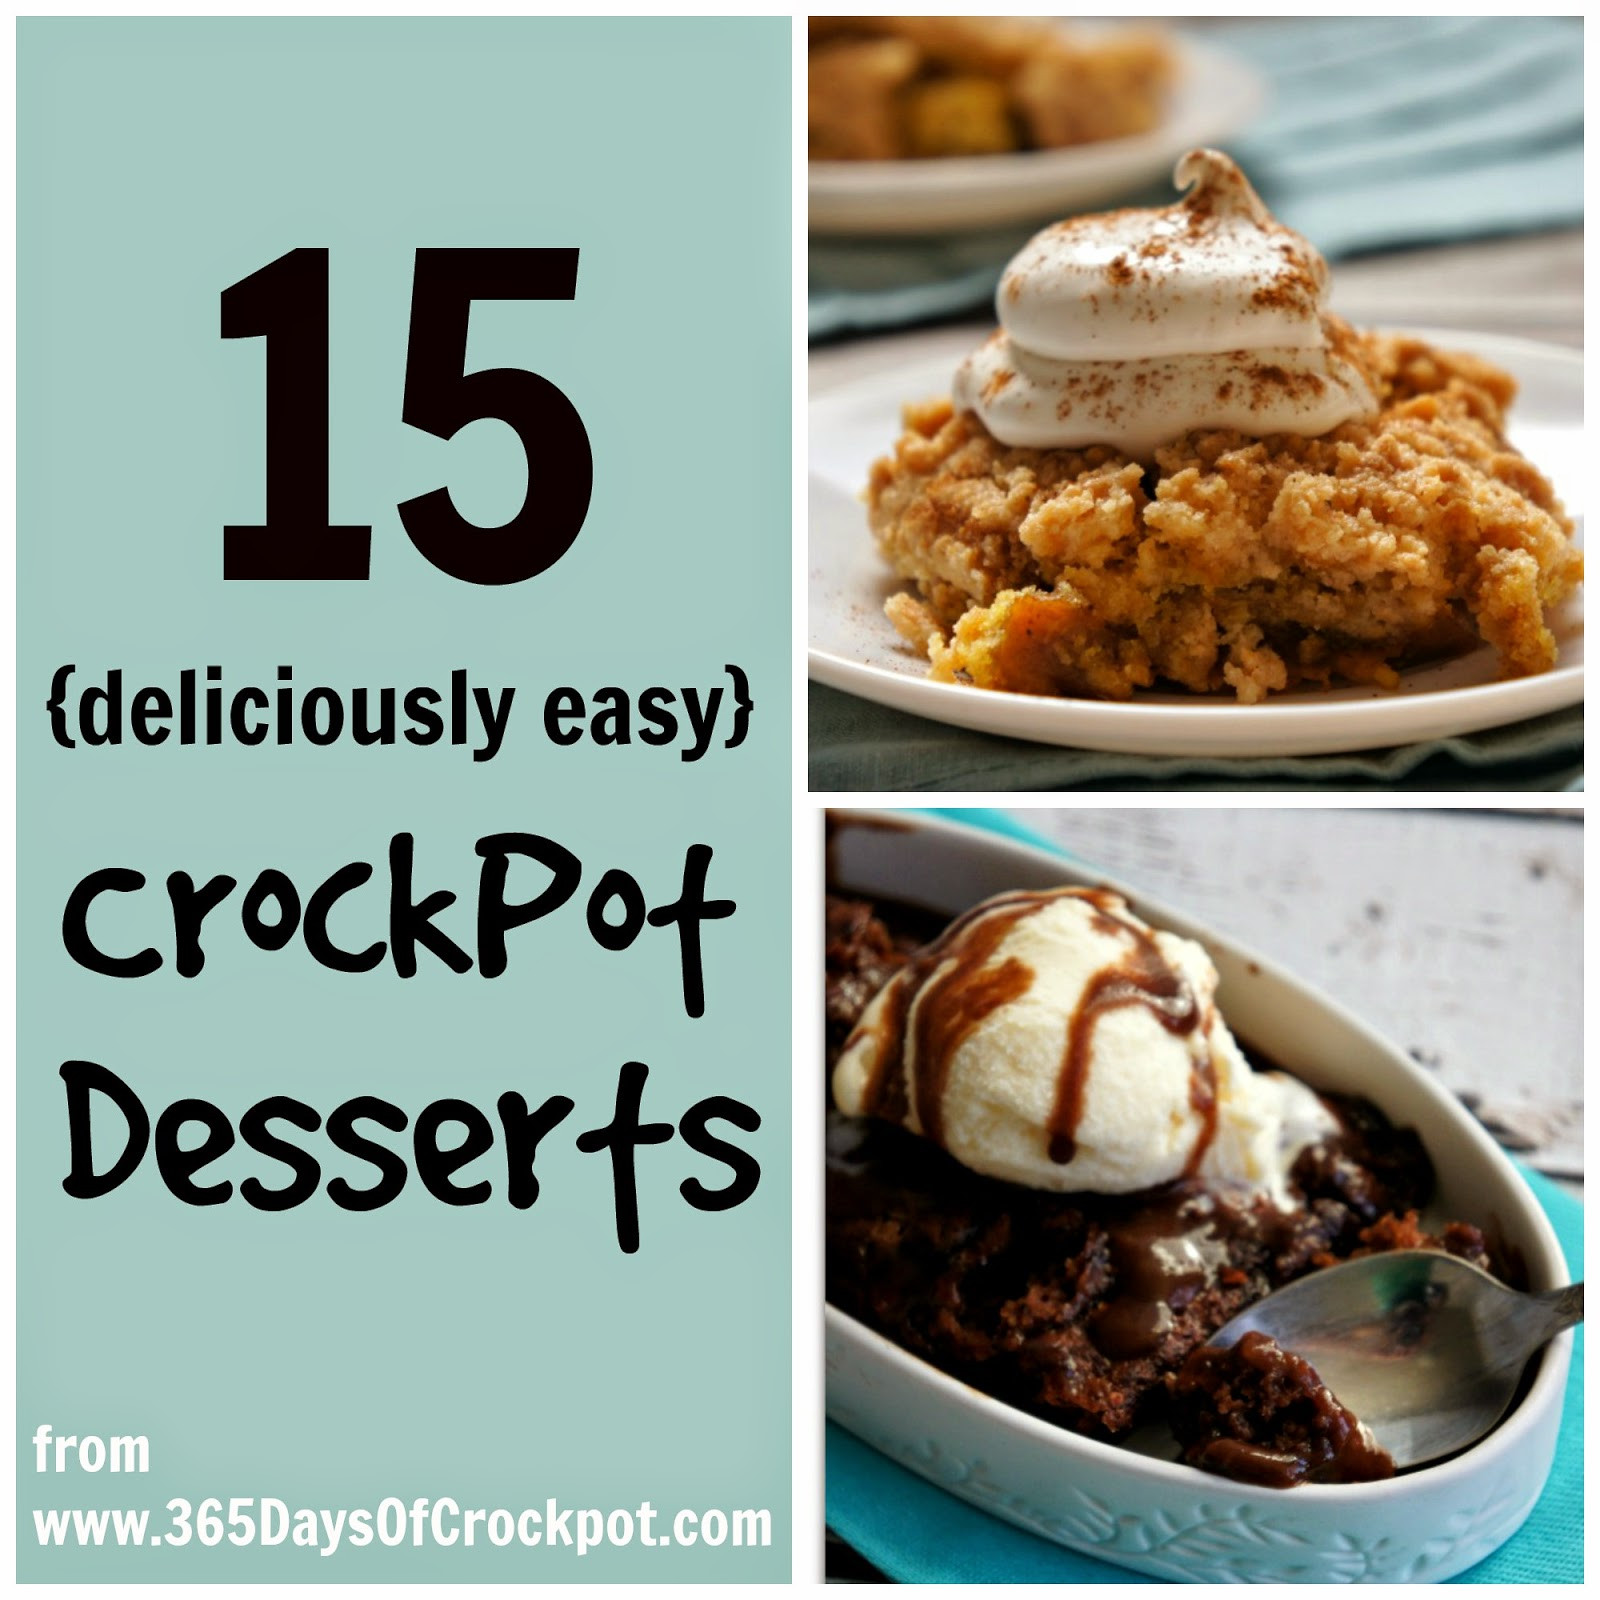 Slow Cooker Desserts Healthy
 15 Deliciously Easy Slow Cooker Dessert Recipes 365 Days